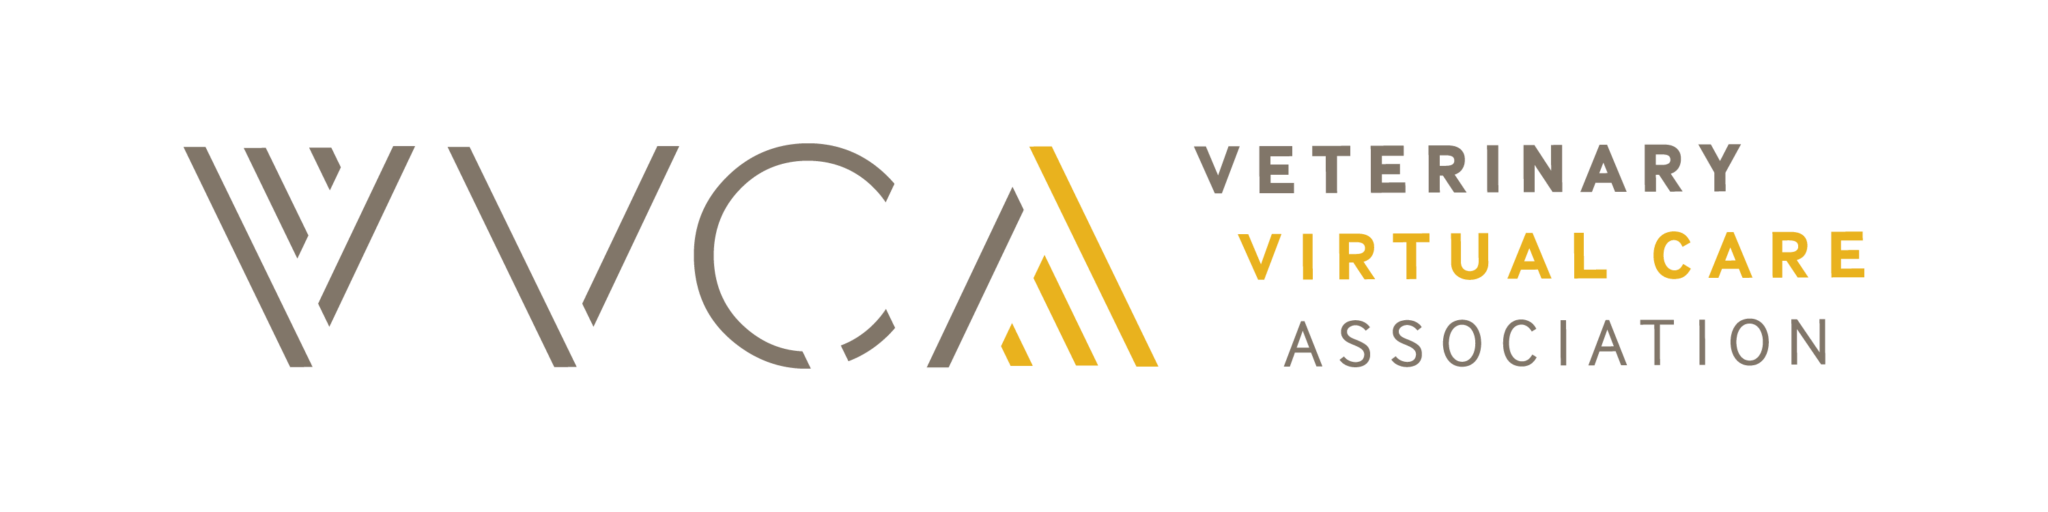 VVCA announces new board co-chairs